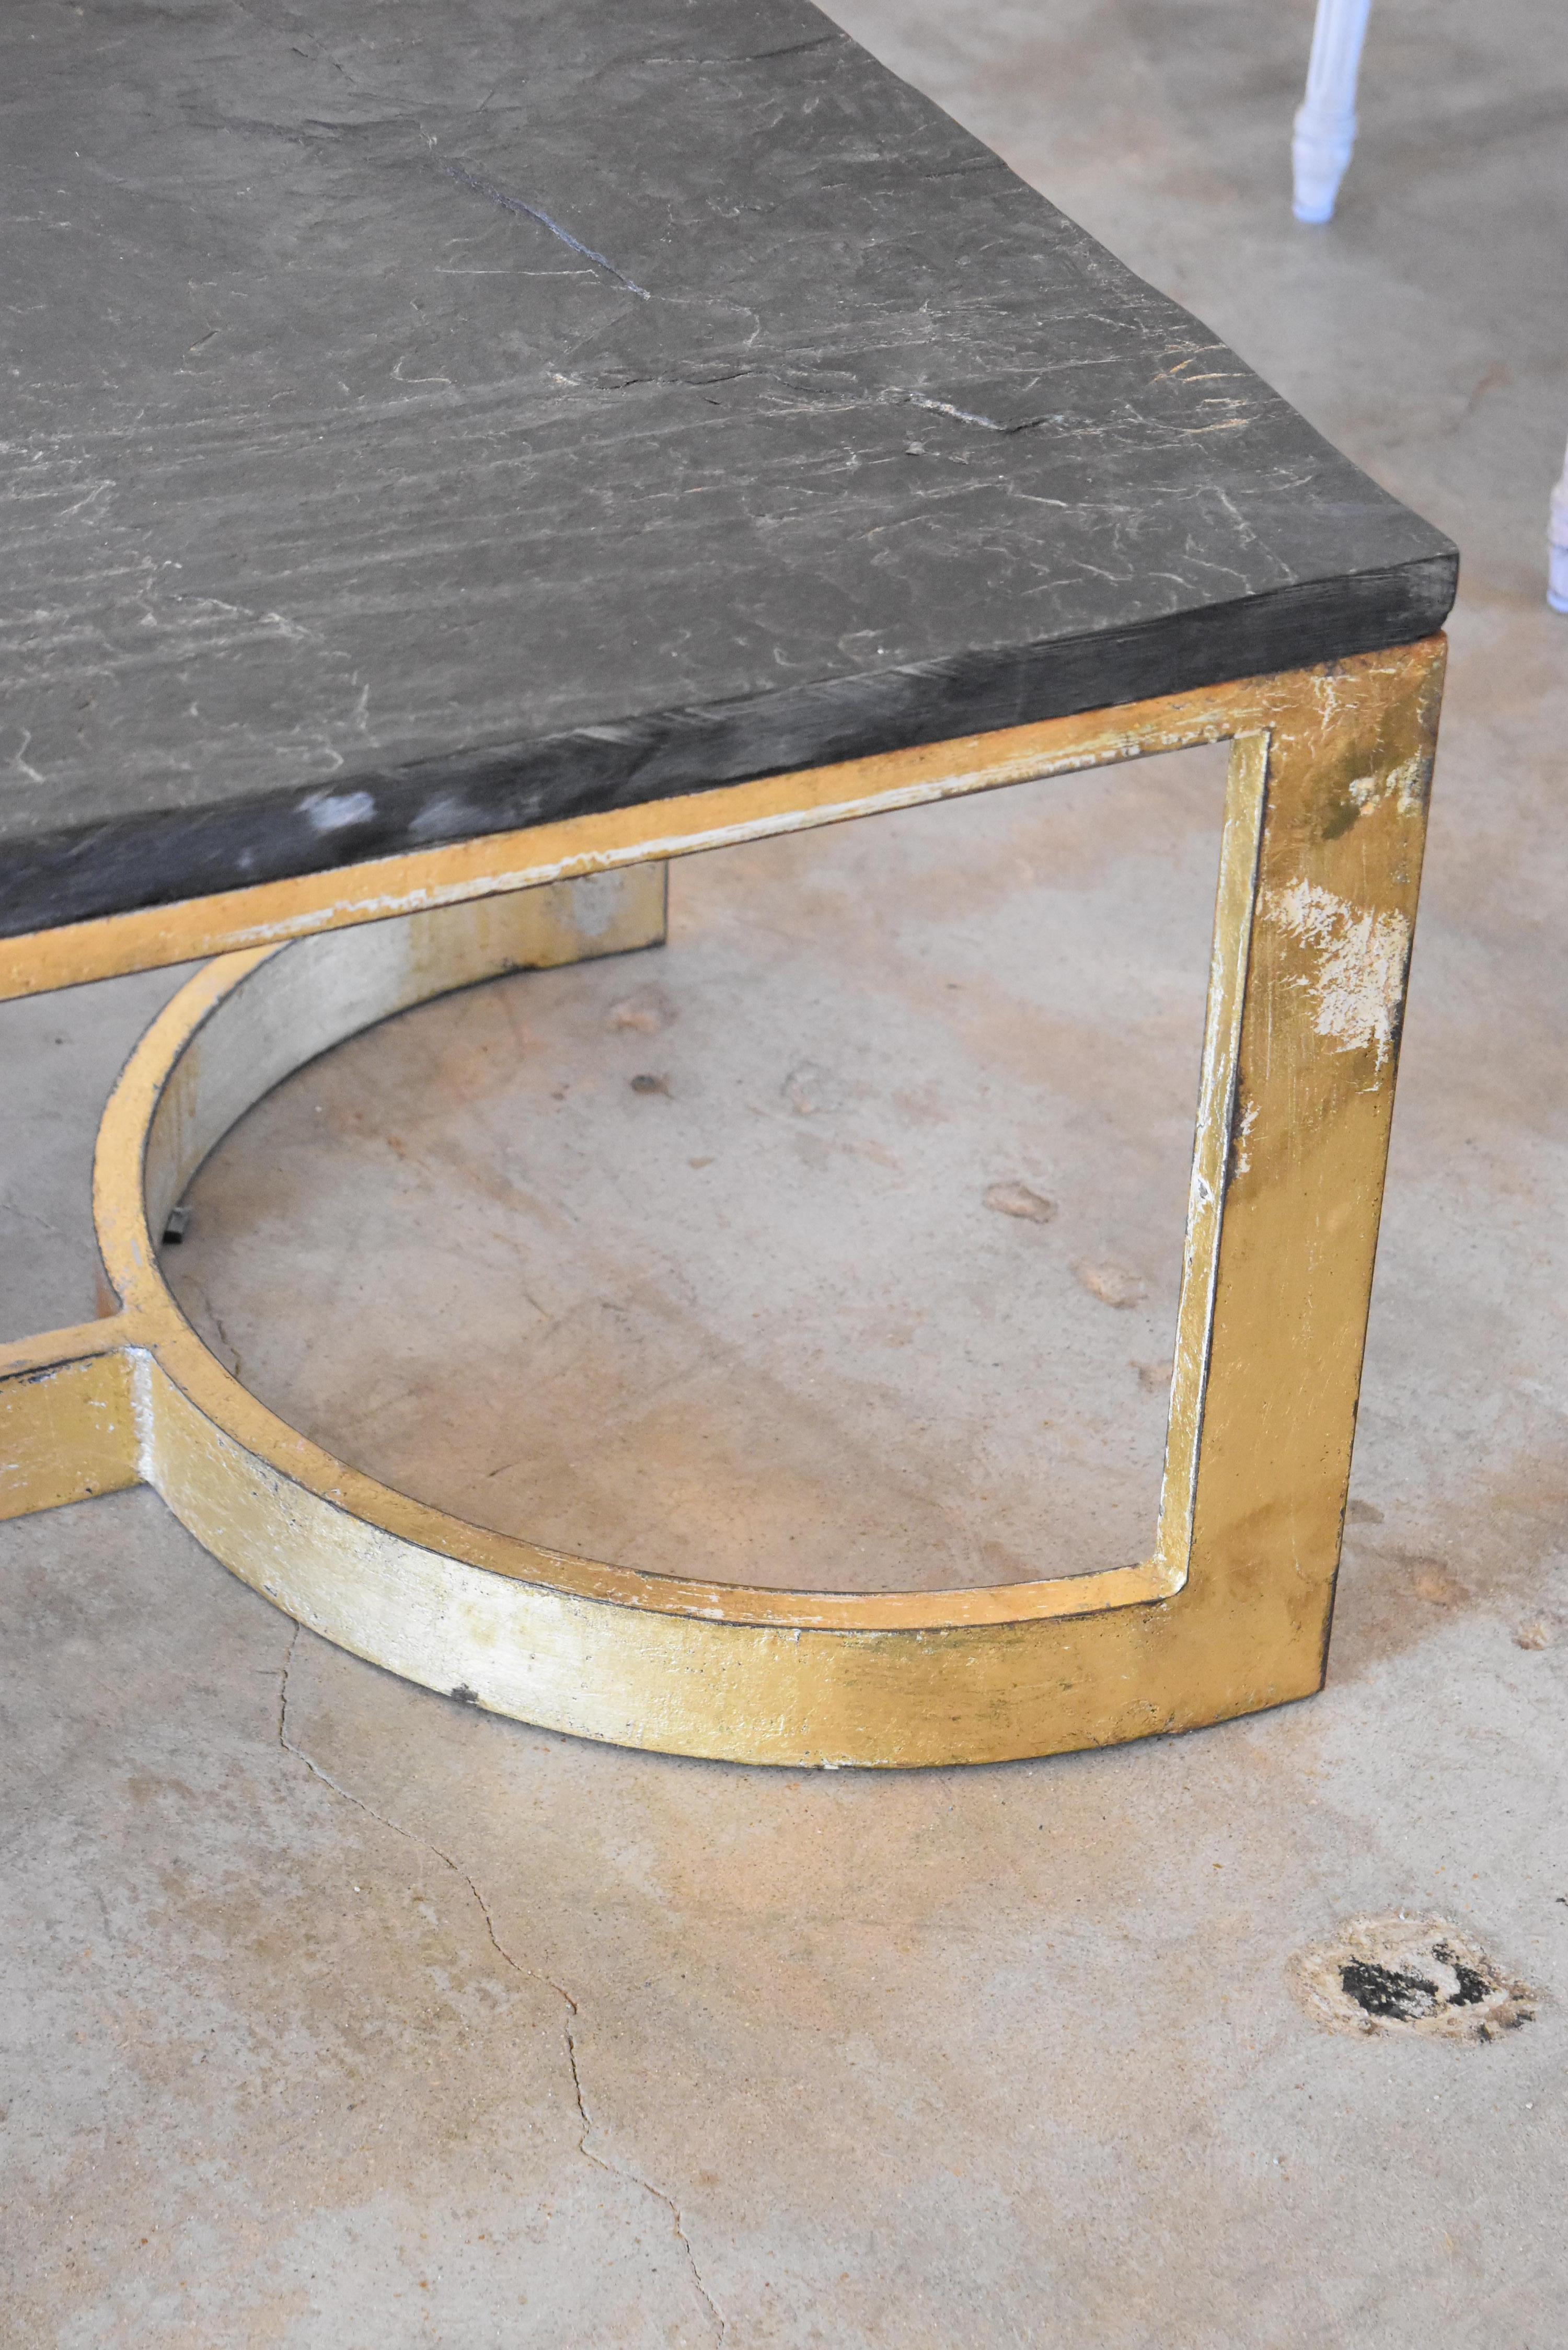 This is a very heavy duty table made by our own artisans in Europe out of steel, fitted with slate top and gilt. It's meant to look vintage and not perfect so there will be scratches and imperfections.